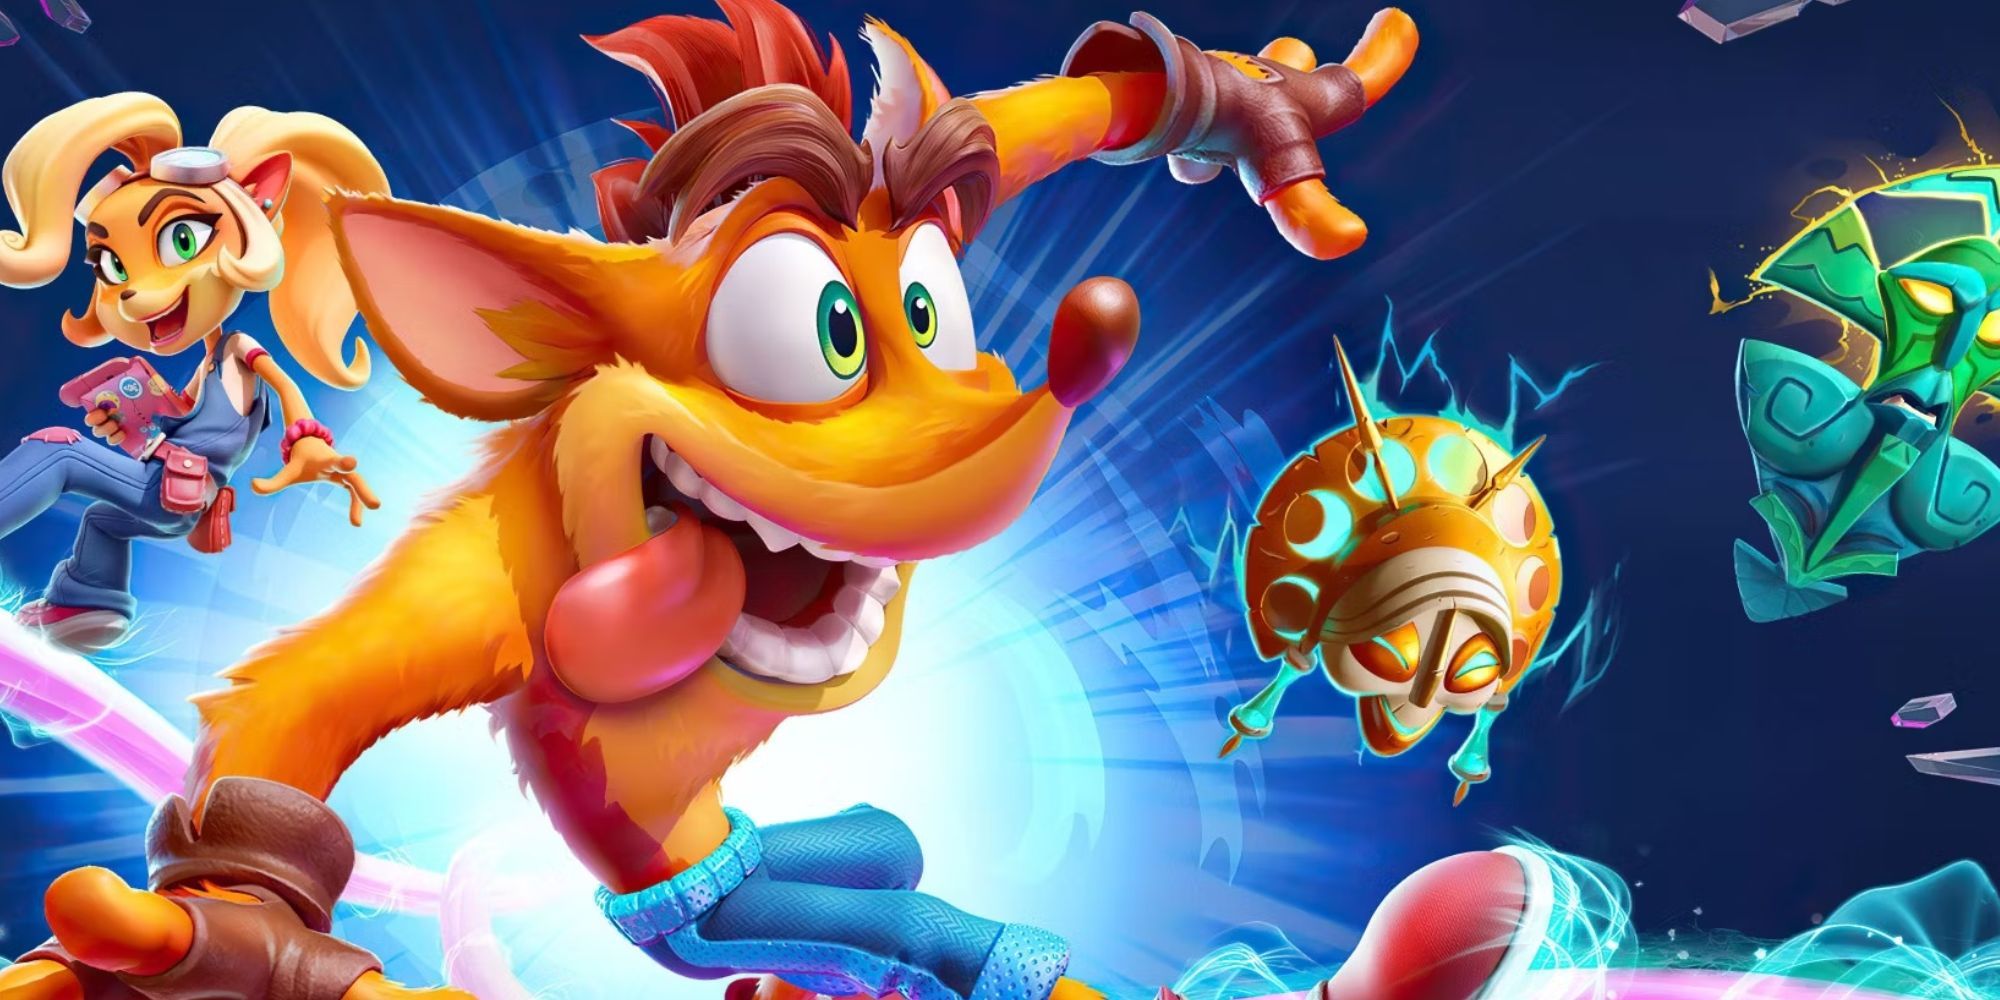 Crash Bandicoot in the foreground and Coco Bandicoot in the background in a promotional image for Crash 4. They are both surfing in the air. 